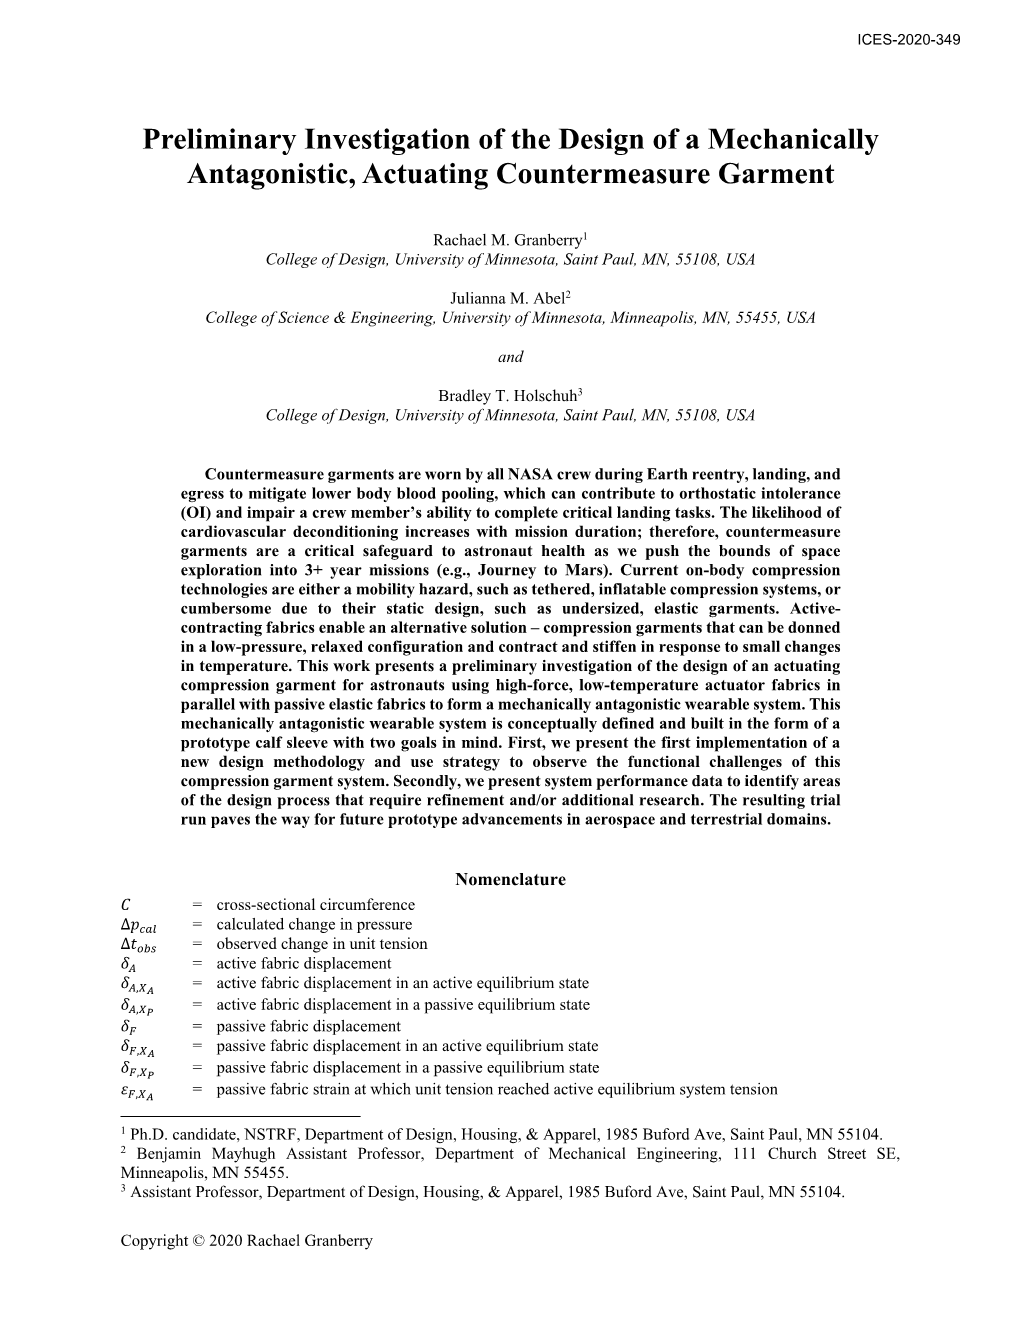 Preliminary Investigation of the Design of a Mechanically Antagonistic, Actuating Countermeasure Garment